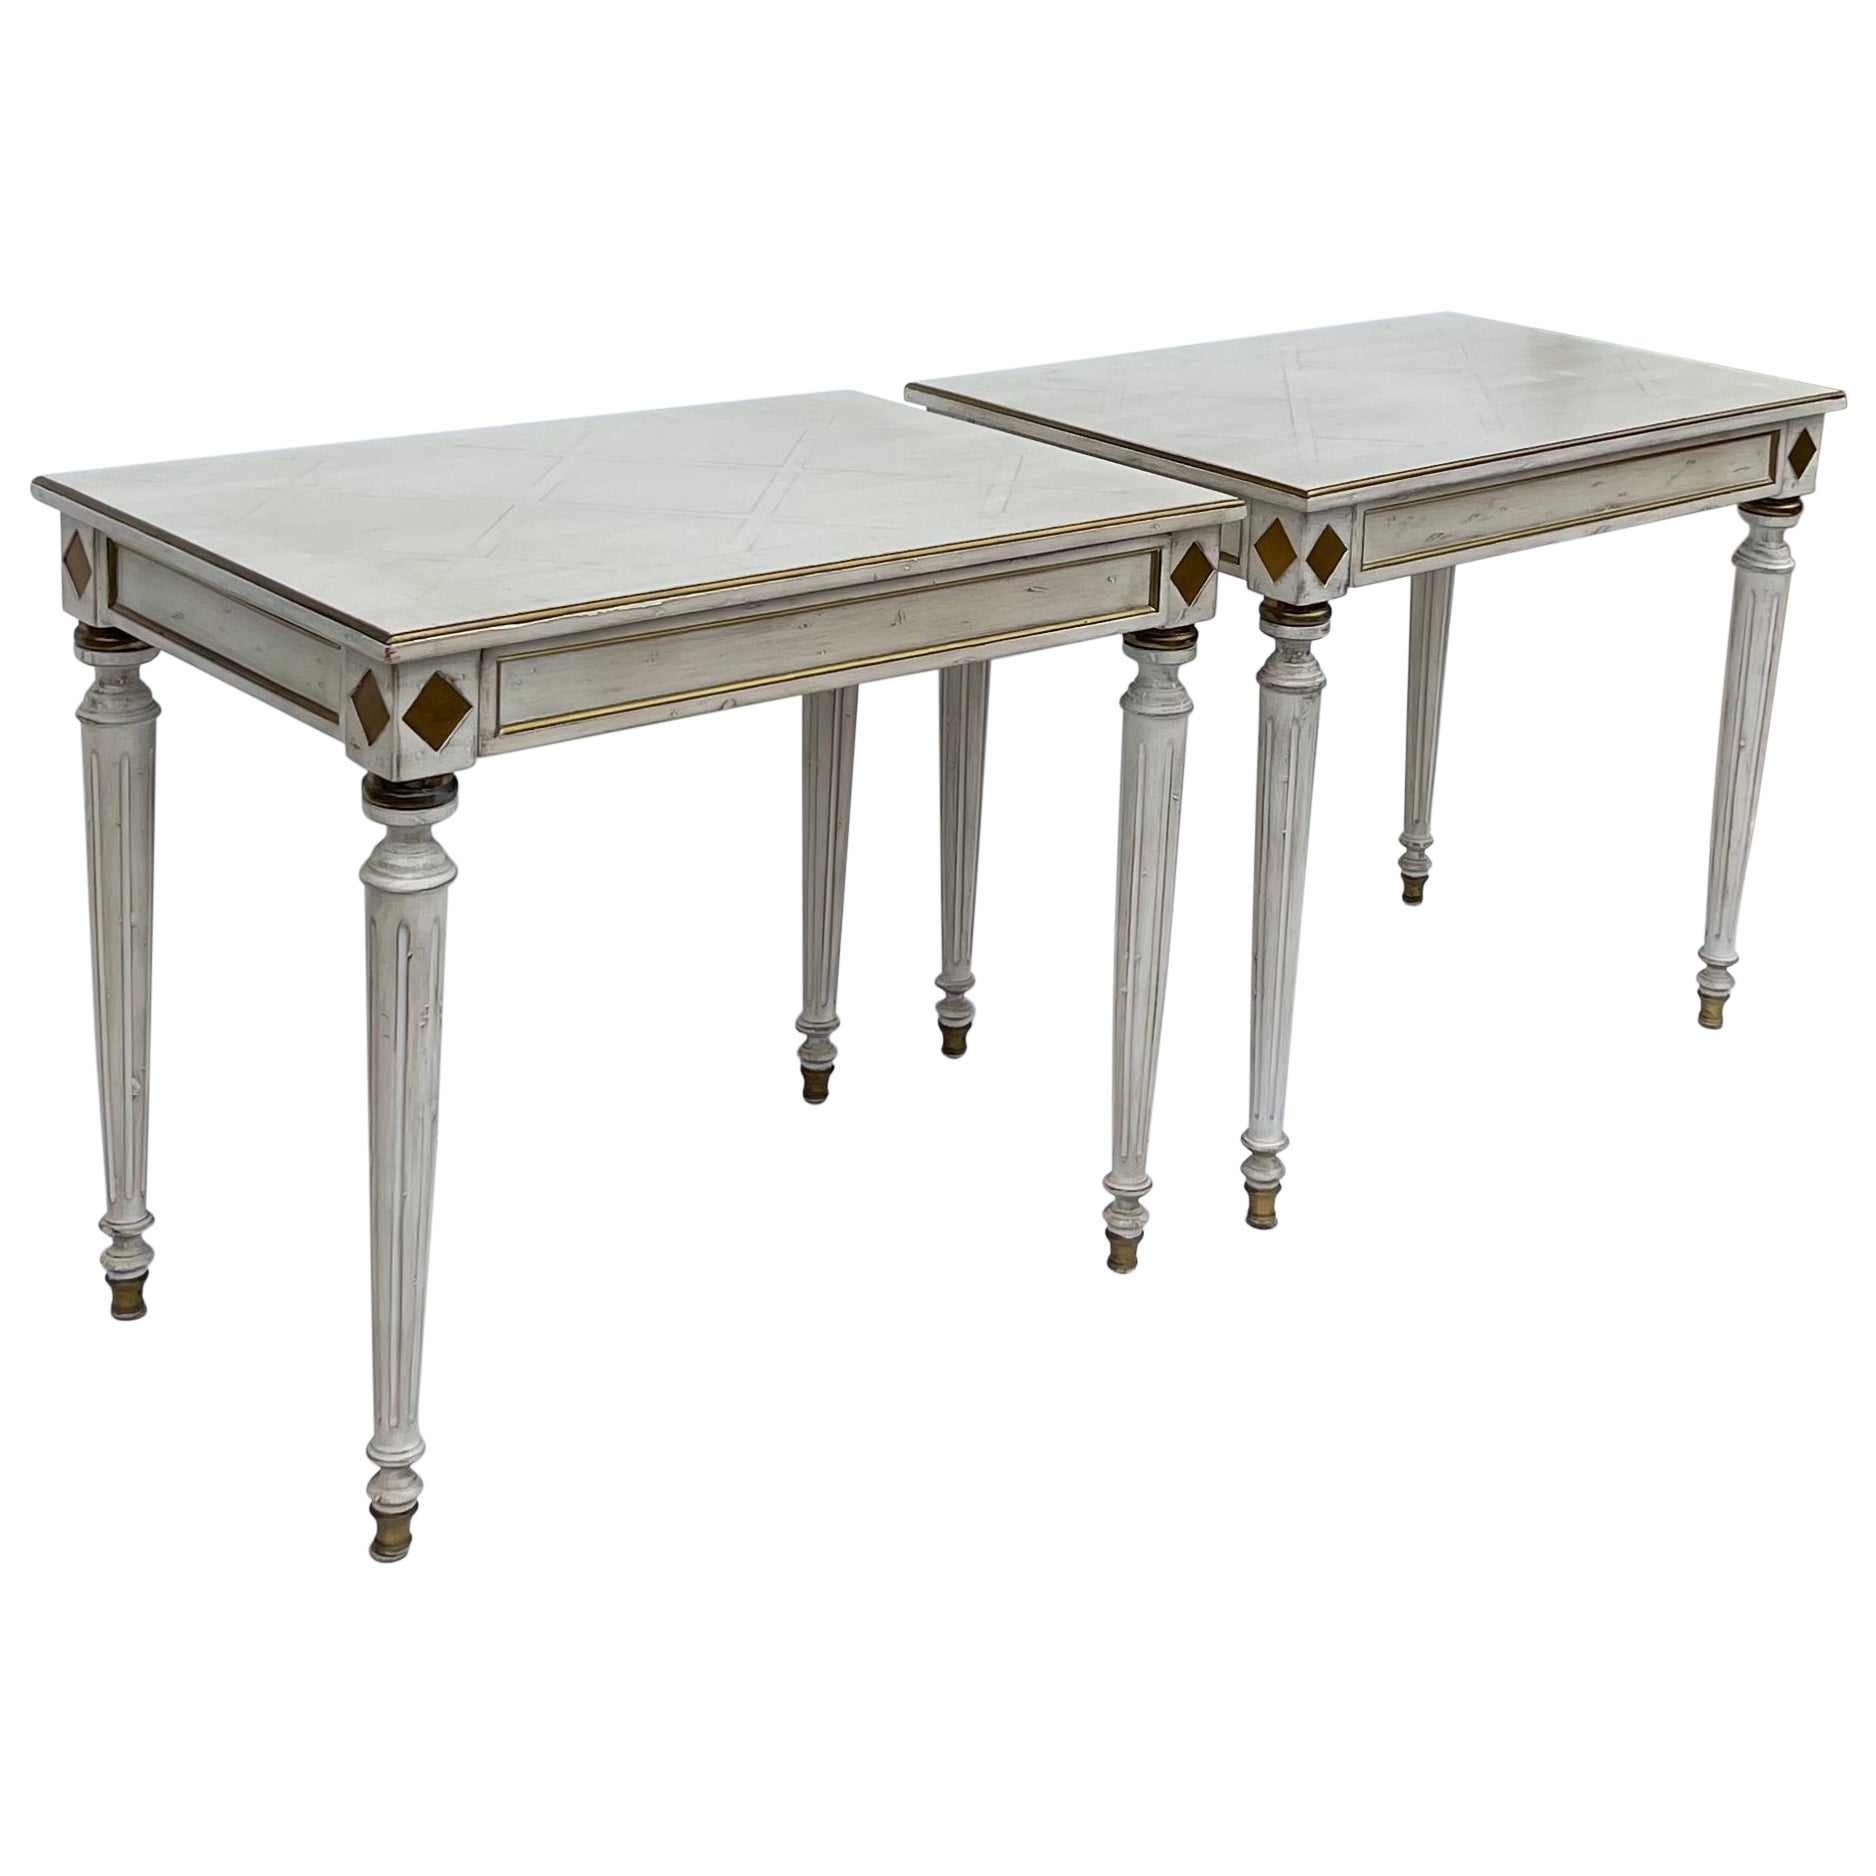 French White Painted and Gilt Side Tables with Parquet Marquetry Tops-Pair